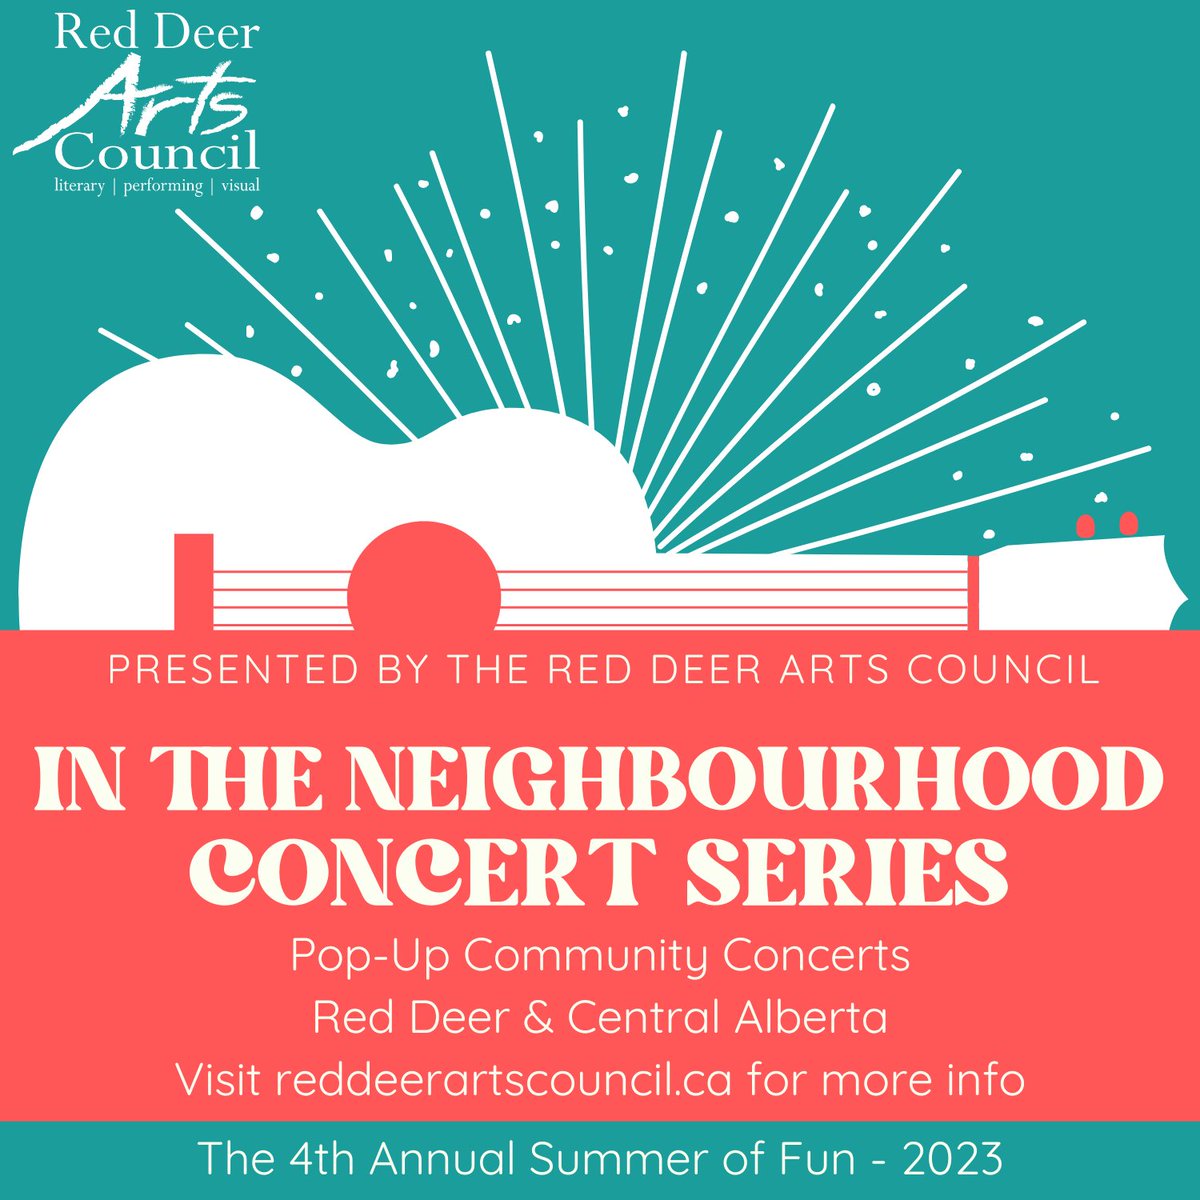 Hey musicians! Time to submit yourself/your group to be a part of the In the Neighbourhood Concert Series! 

reddeerartscouncil.ca/about-red-deer…

#creativityunderstood #reddeerarts #reddeerevents
#concertseries #musicians #music #CentralAlberta
#reddeermusicians